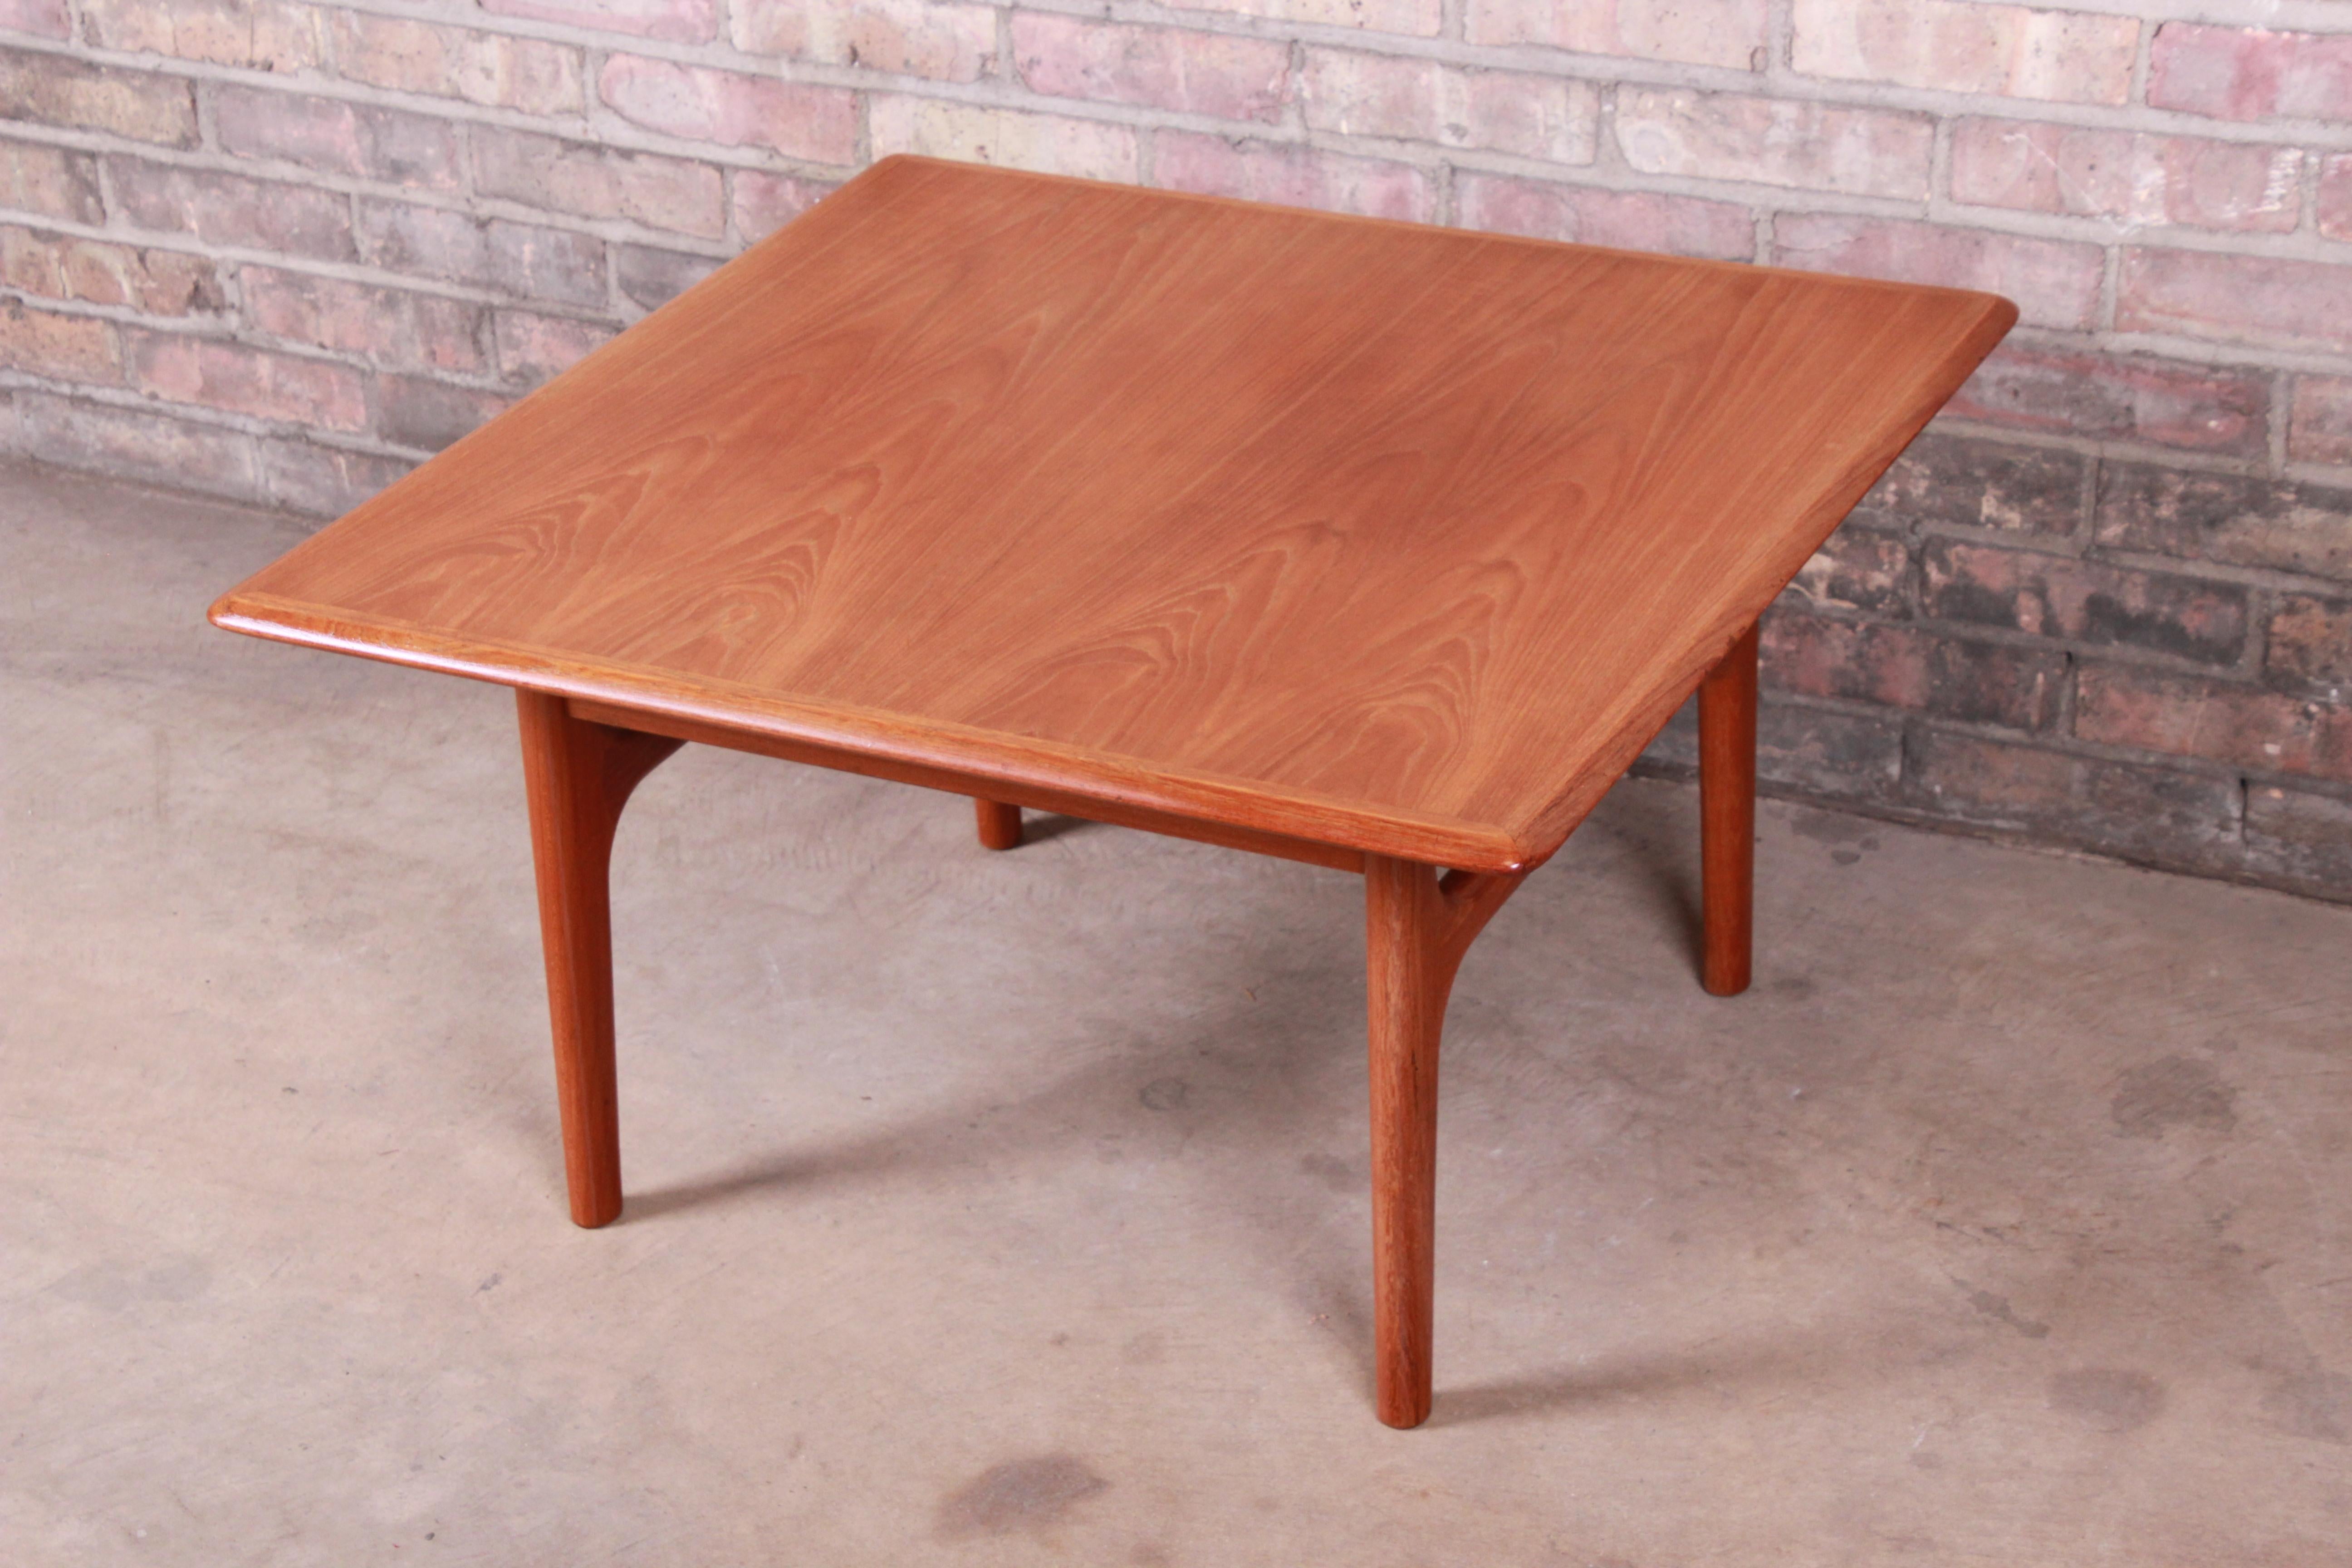 20th Century Danish Modern Sculpted Teak Occasional Side Table by Trioh, circa 1960s